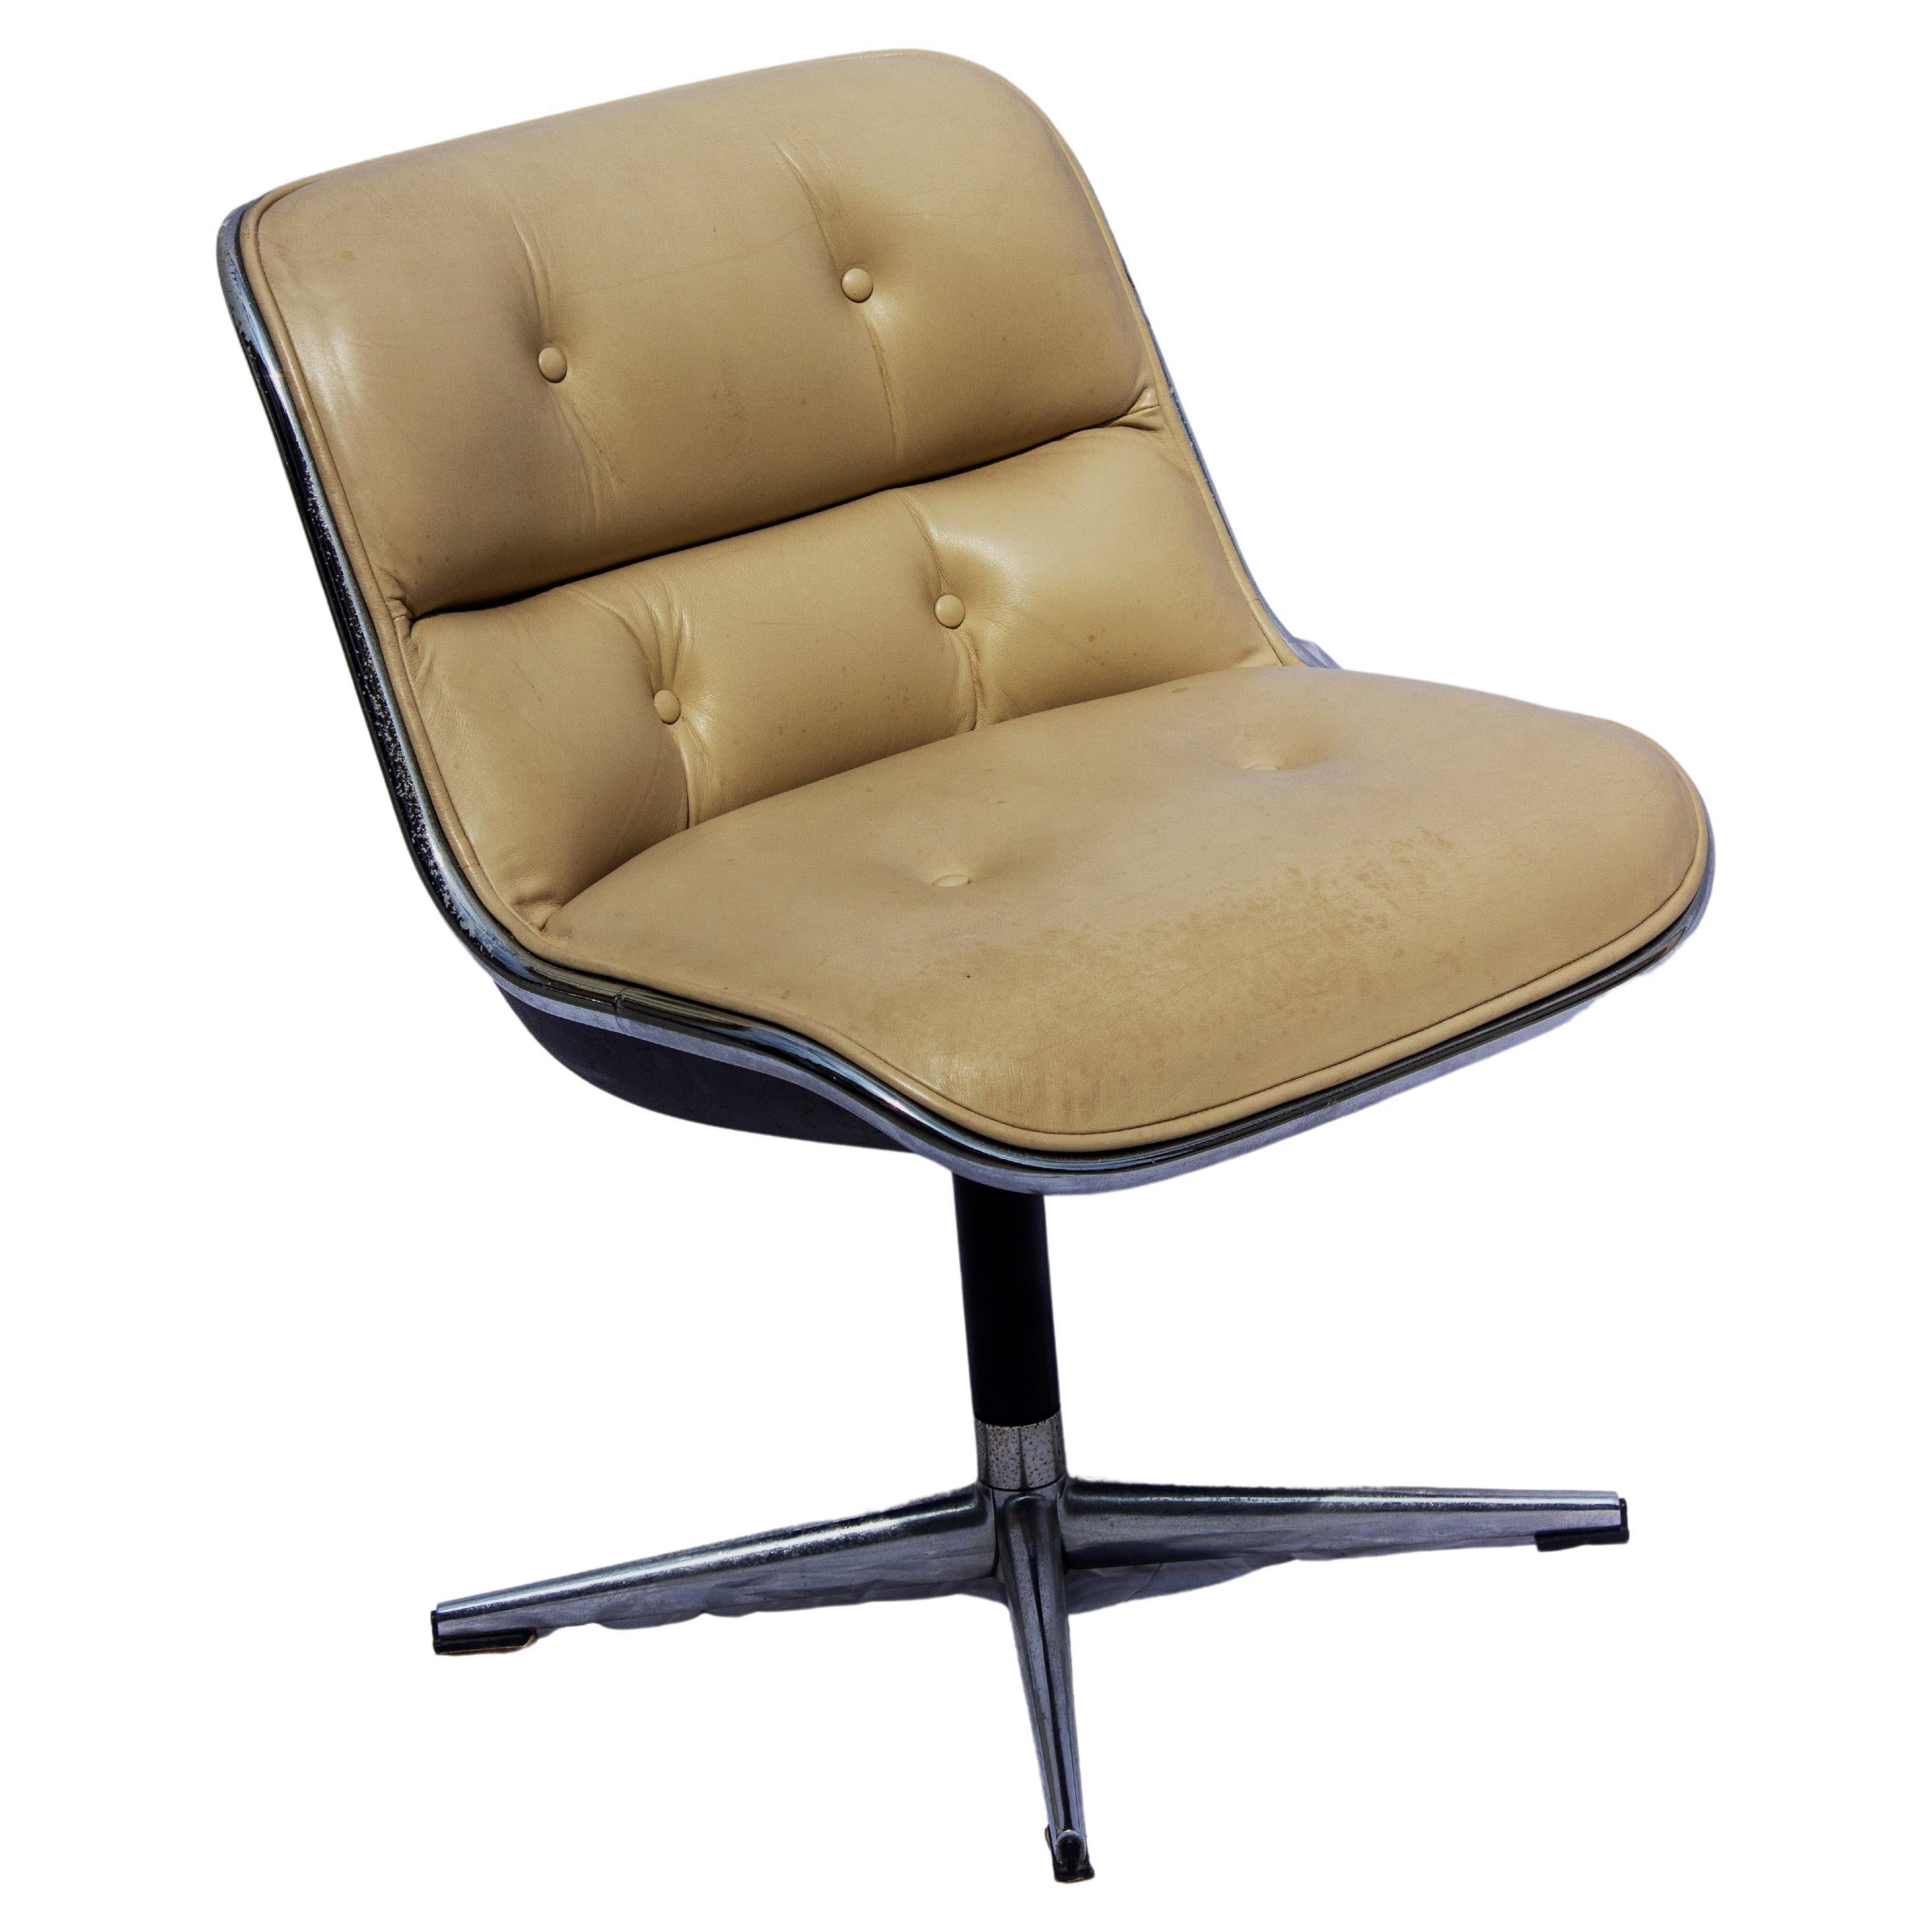 1960s Pollock Executive Chair by Charles Pollock for Knoll For Sale